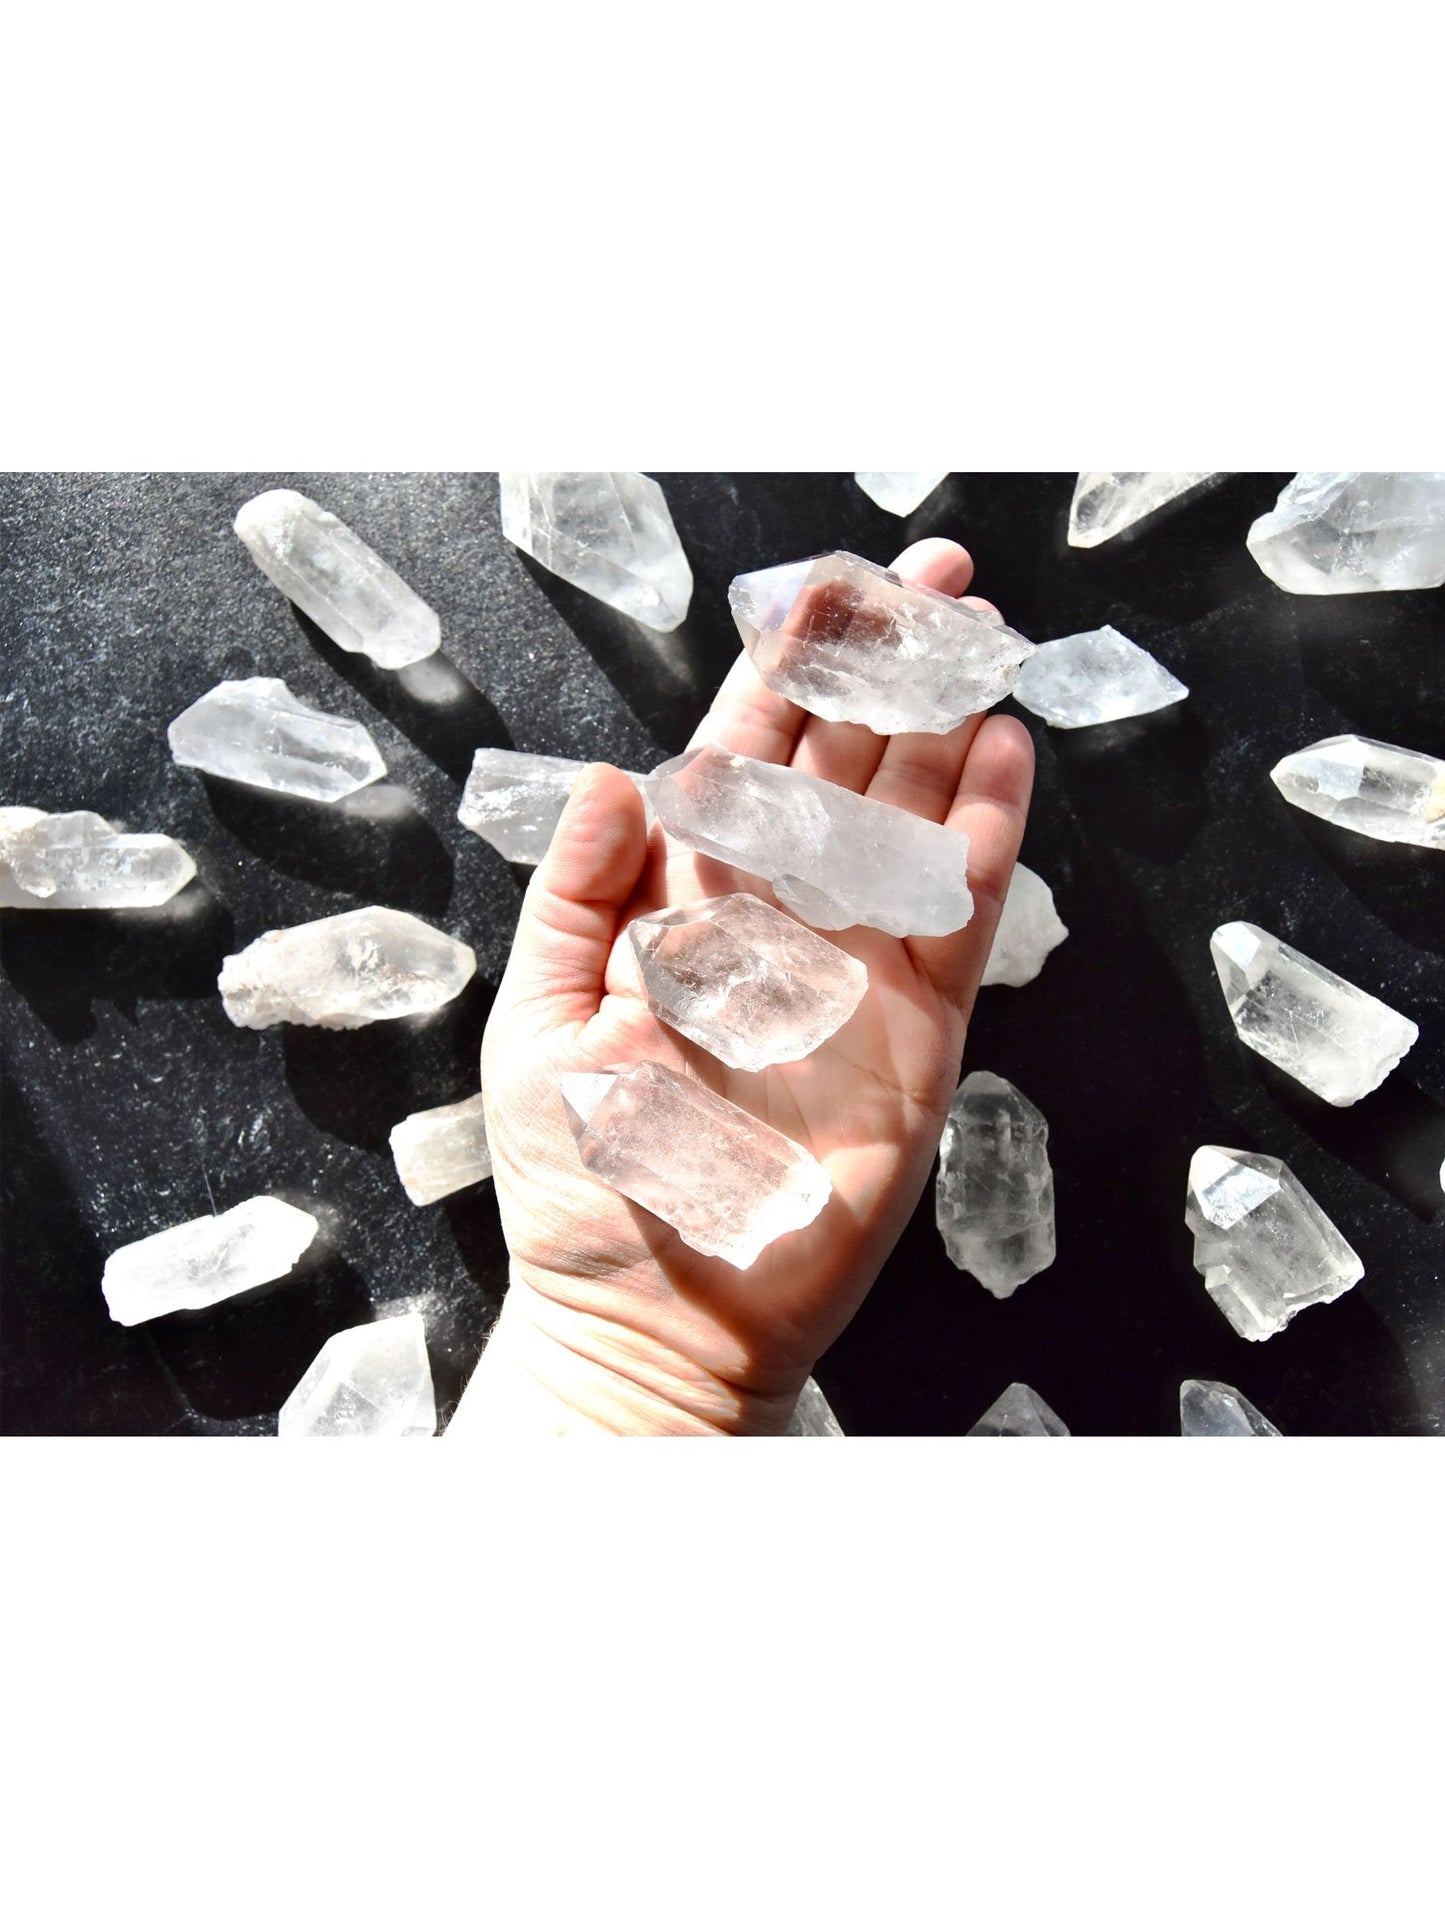 Open Heart Apothecary Quartz Crystal Points Raw Healing Minerals From Brazil